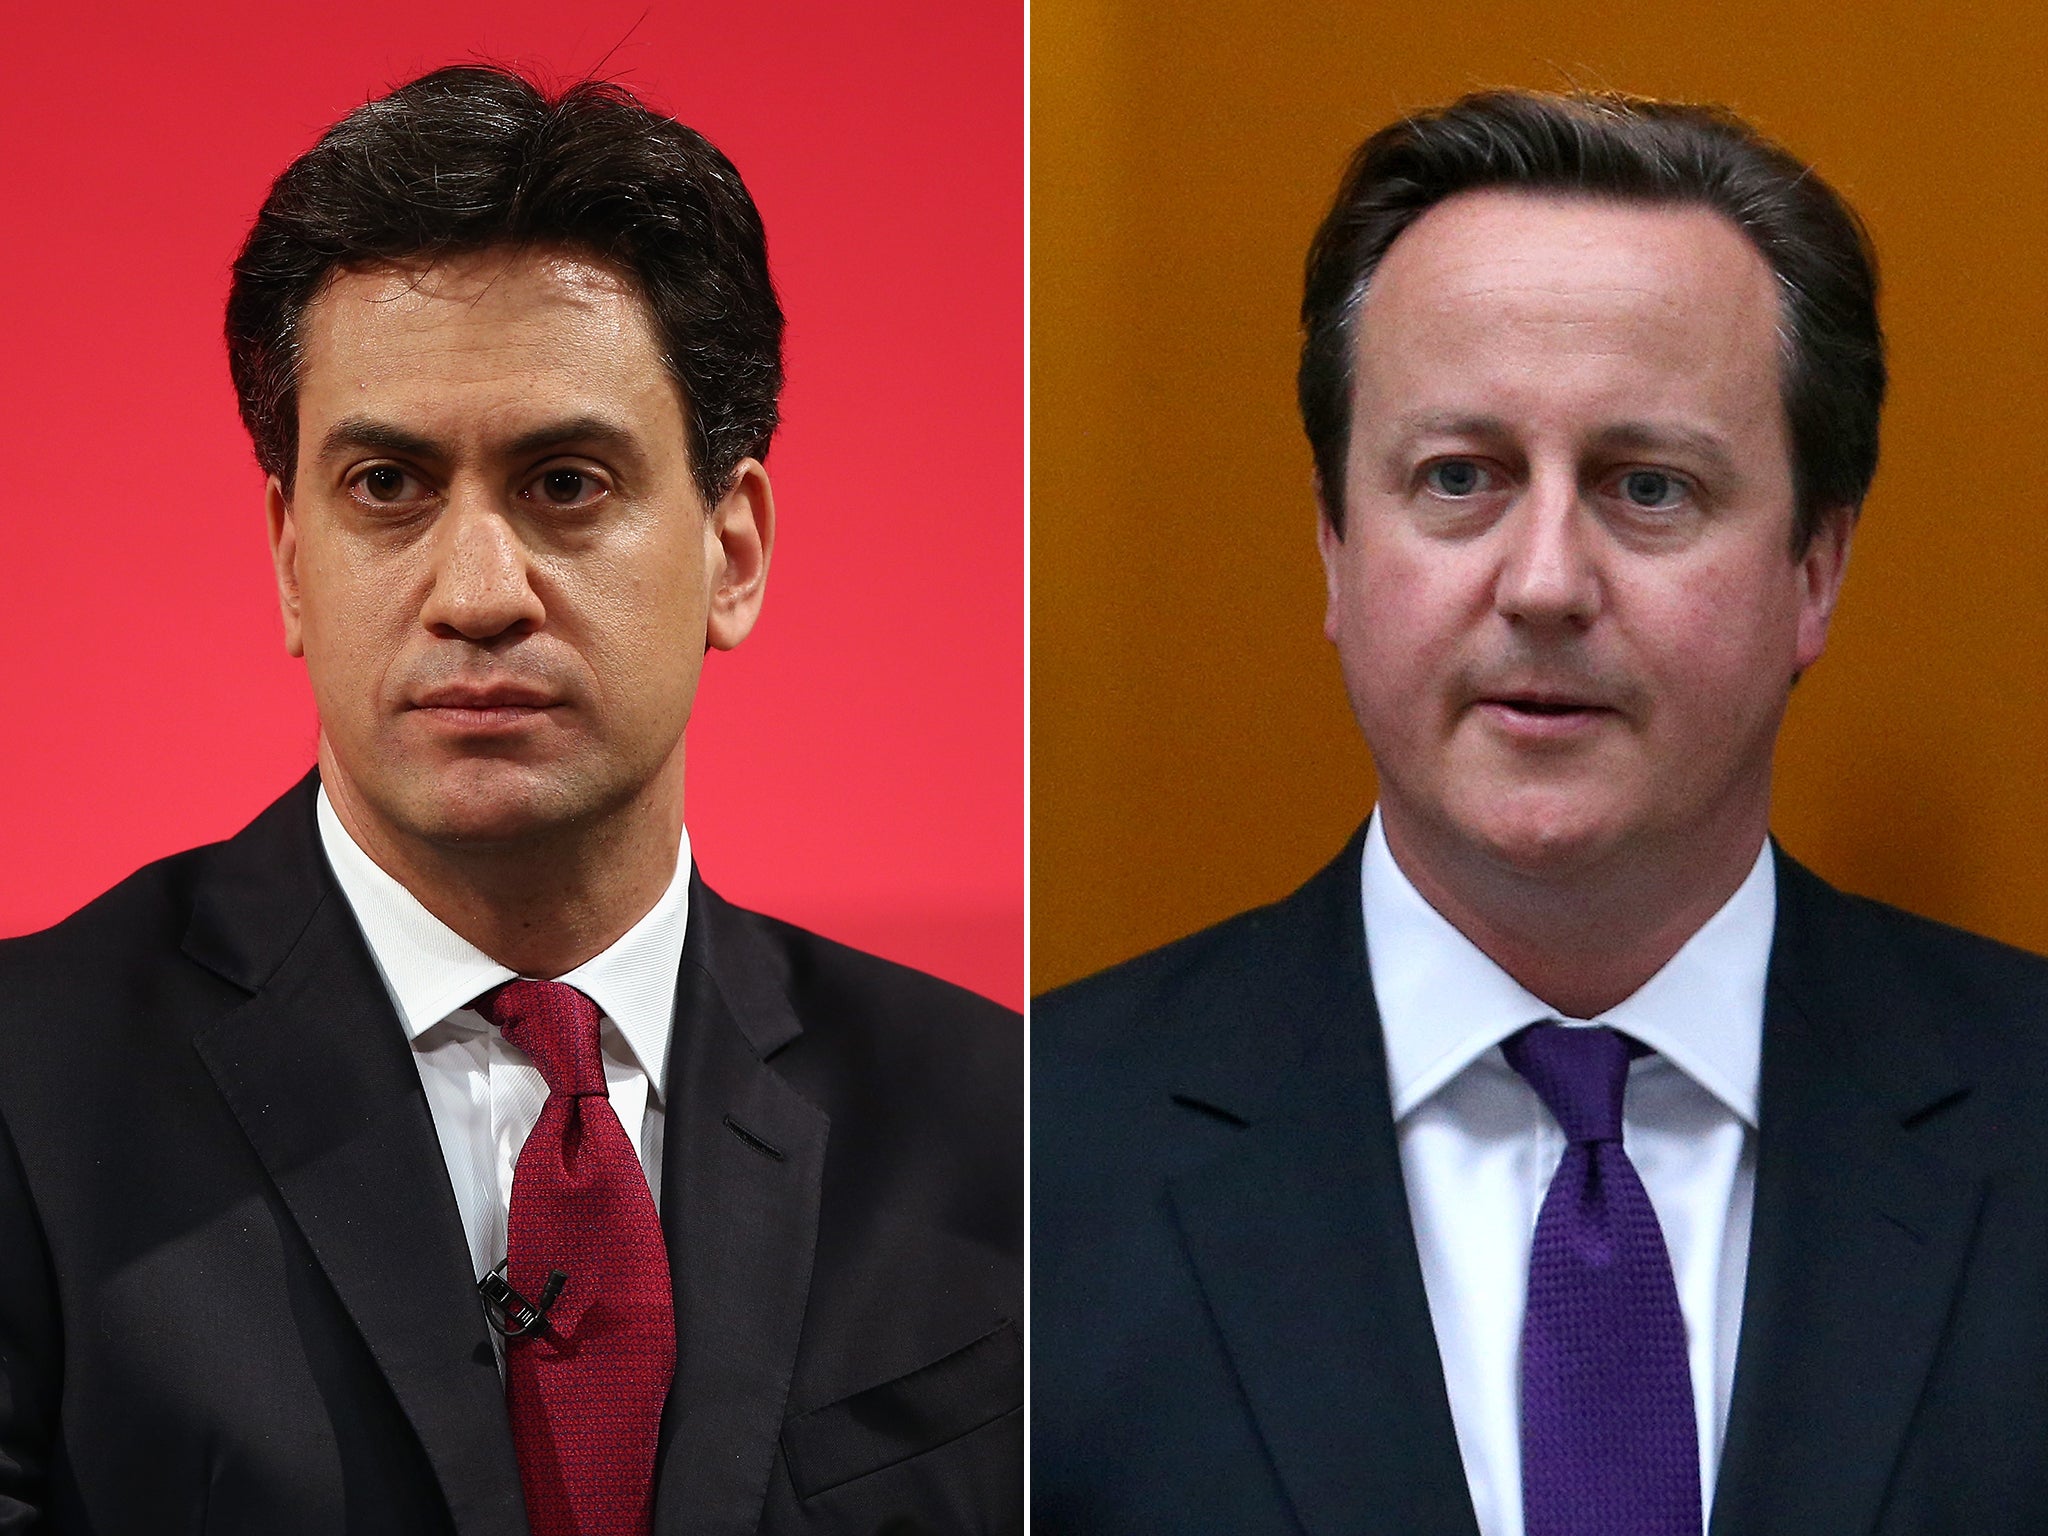 Ed Miliband and David Cameron will be interviewed tonight.